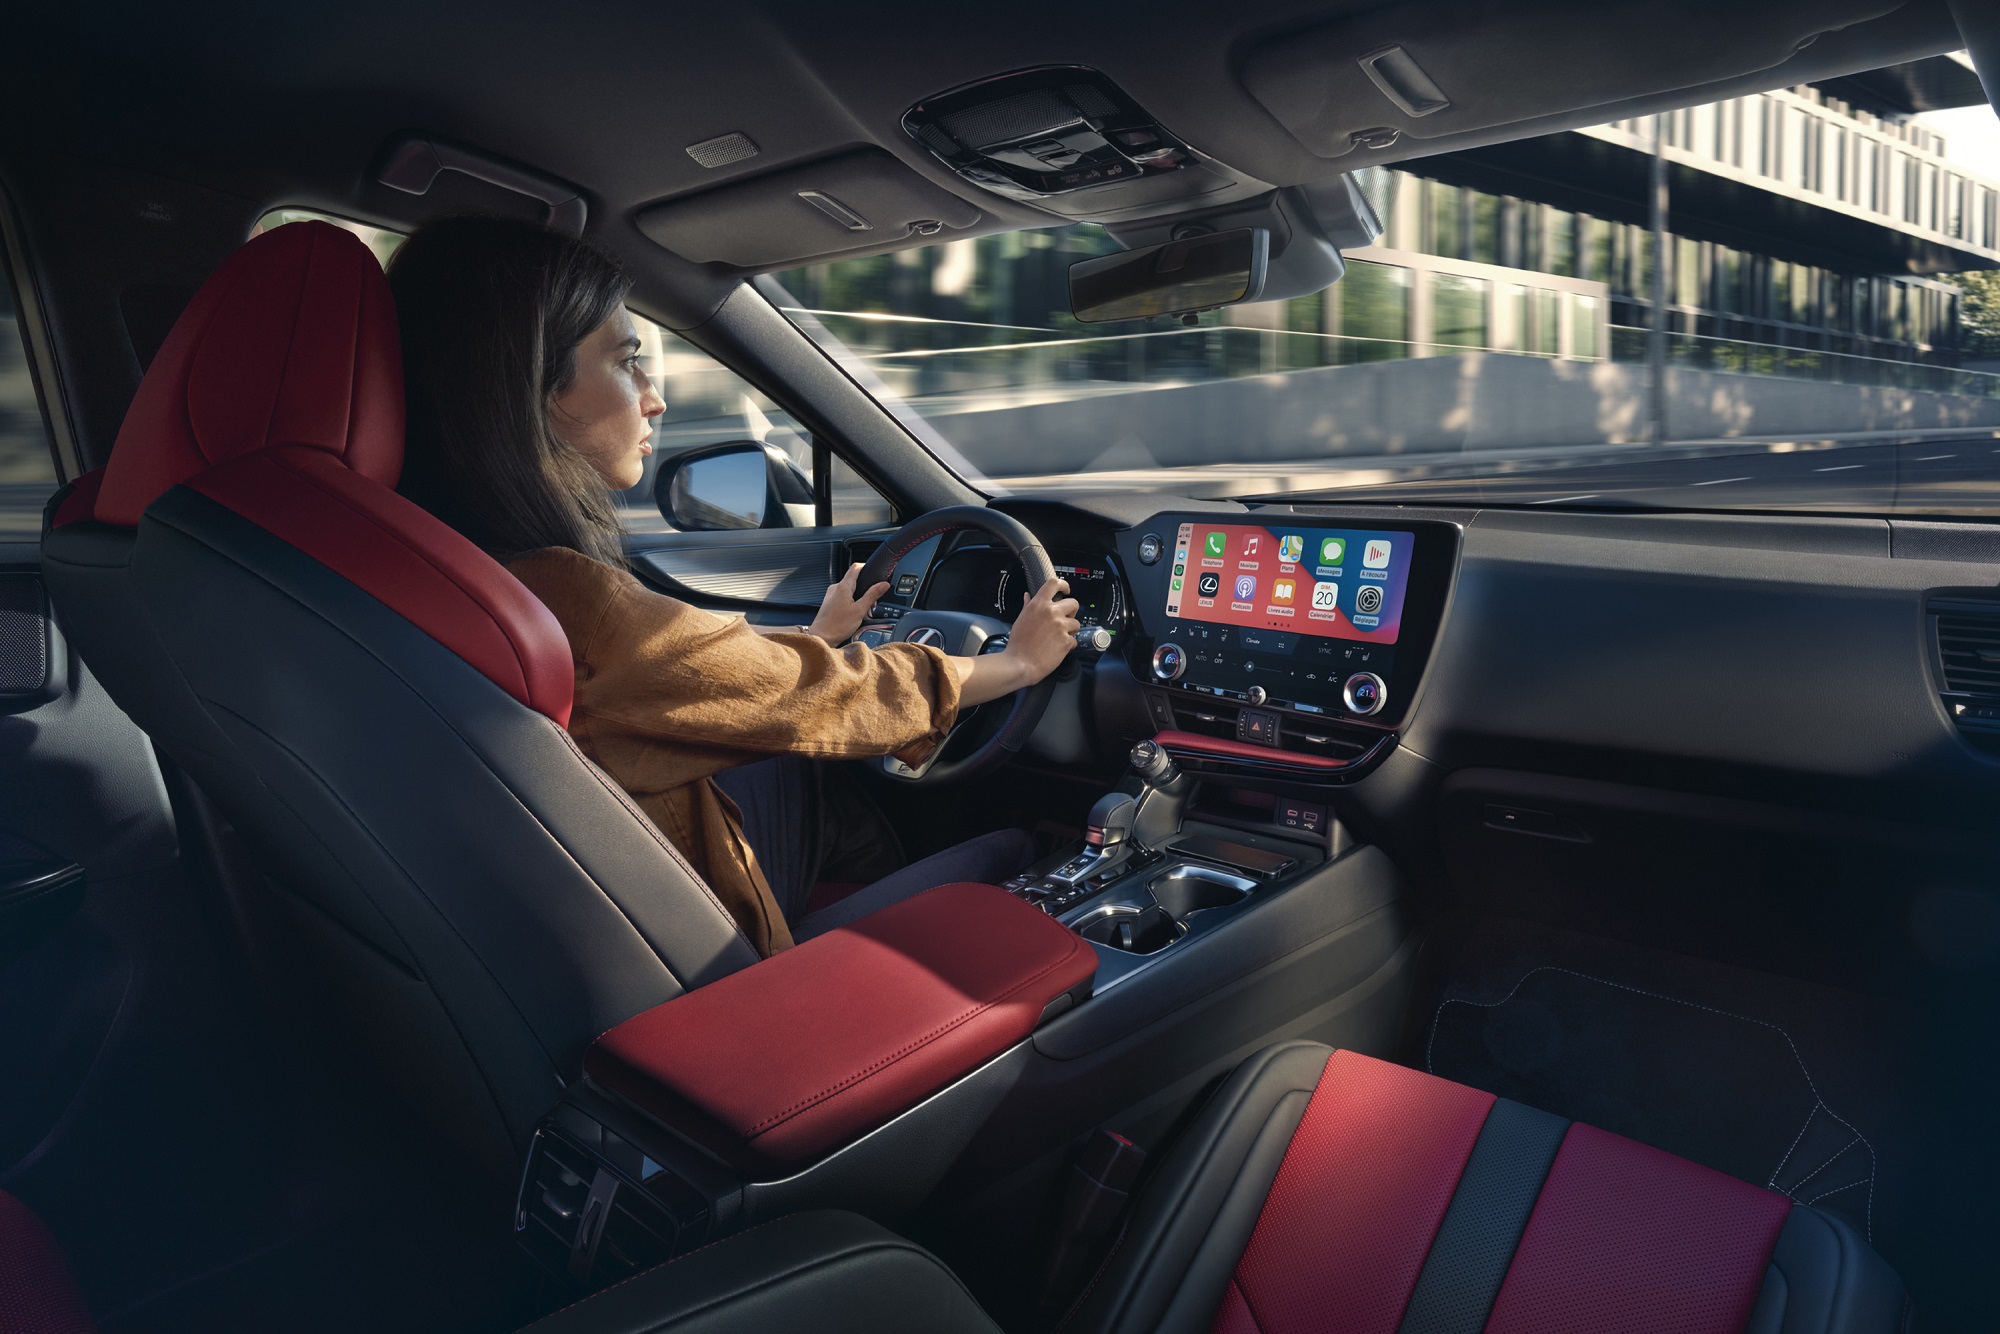 Toyota quiere competir con Android y Apple